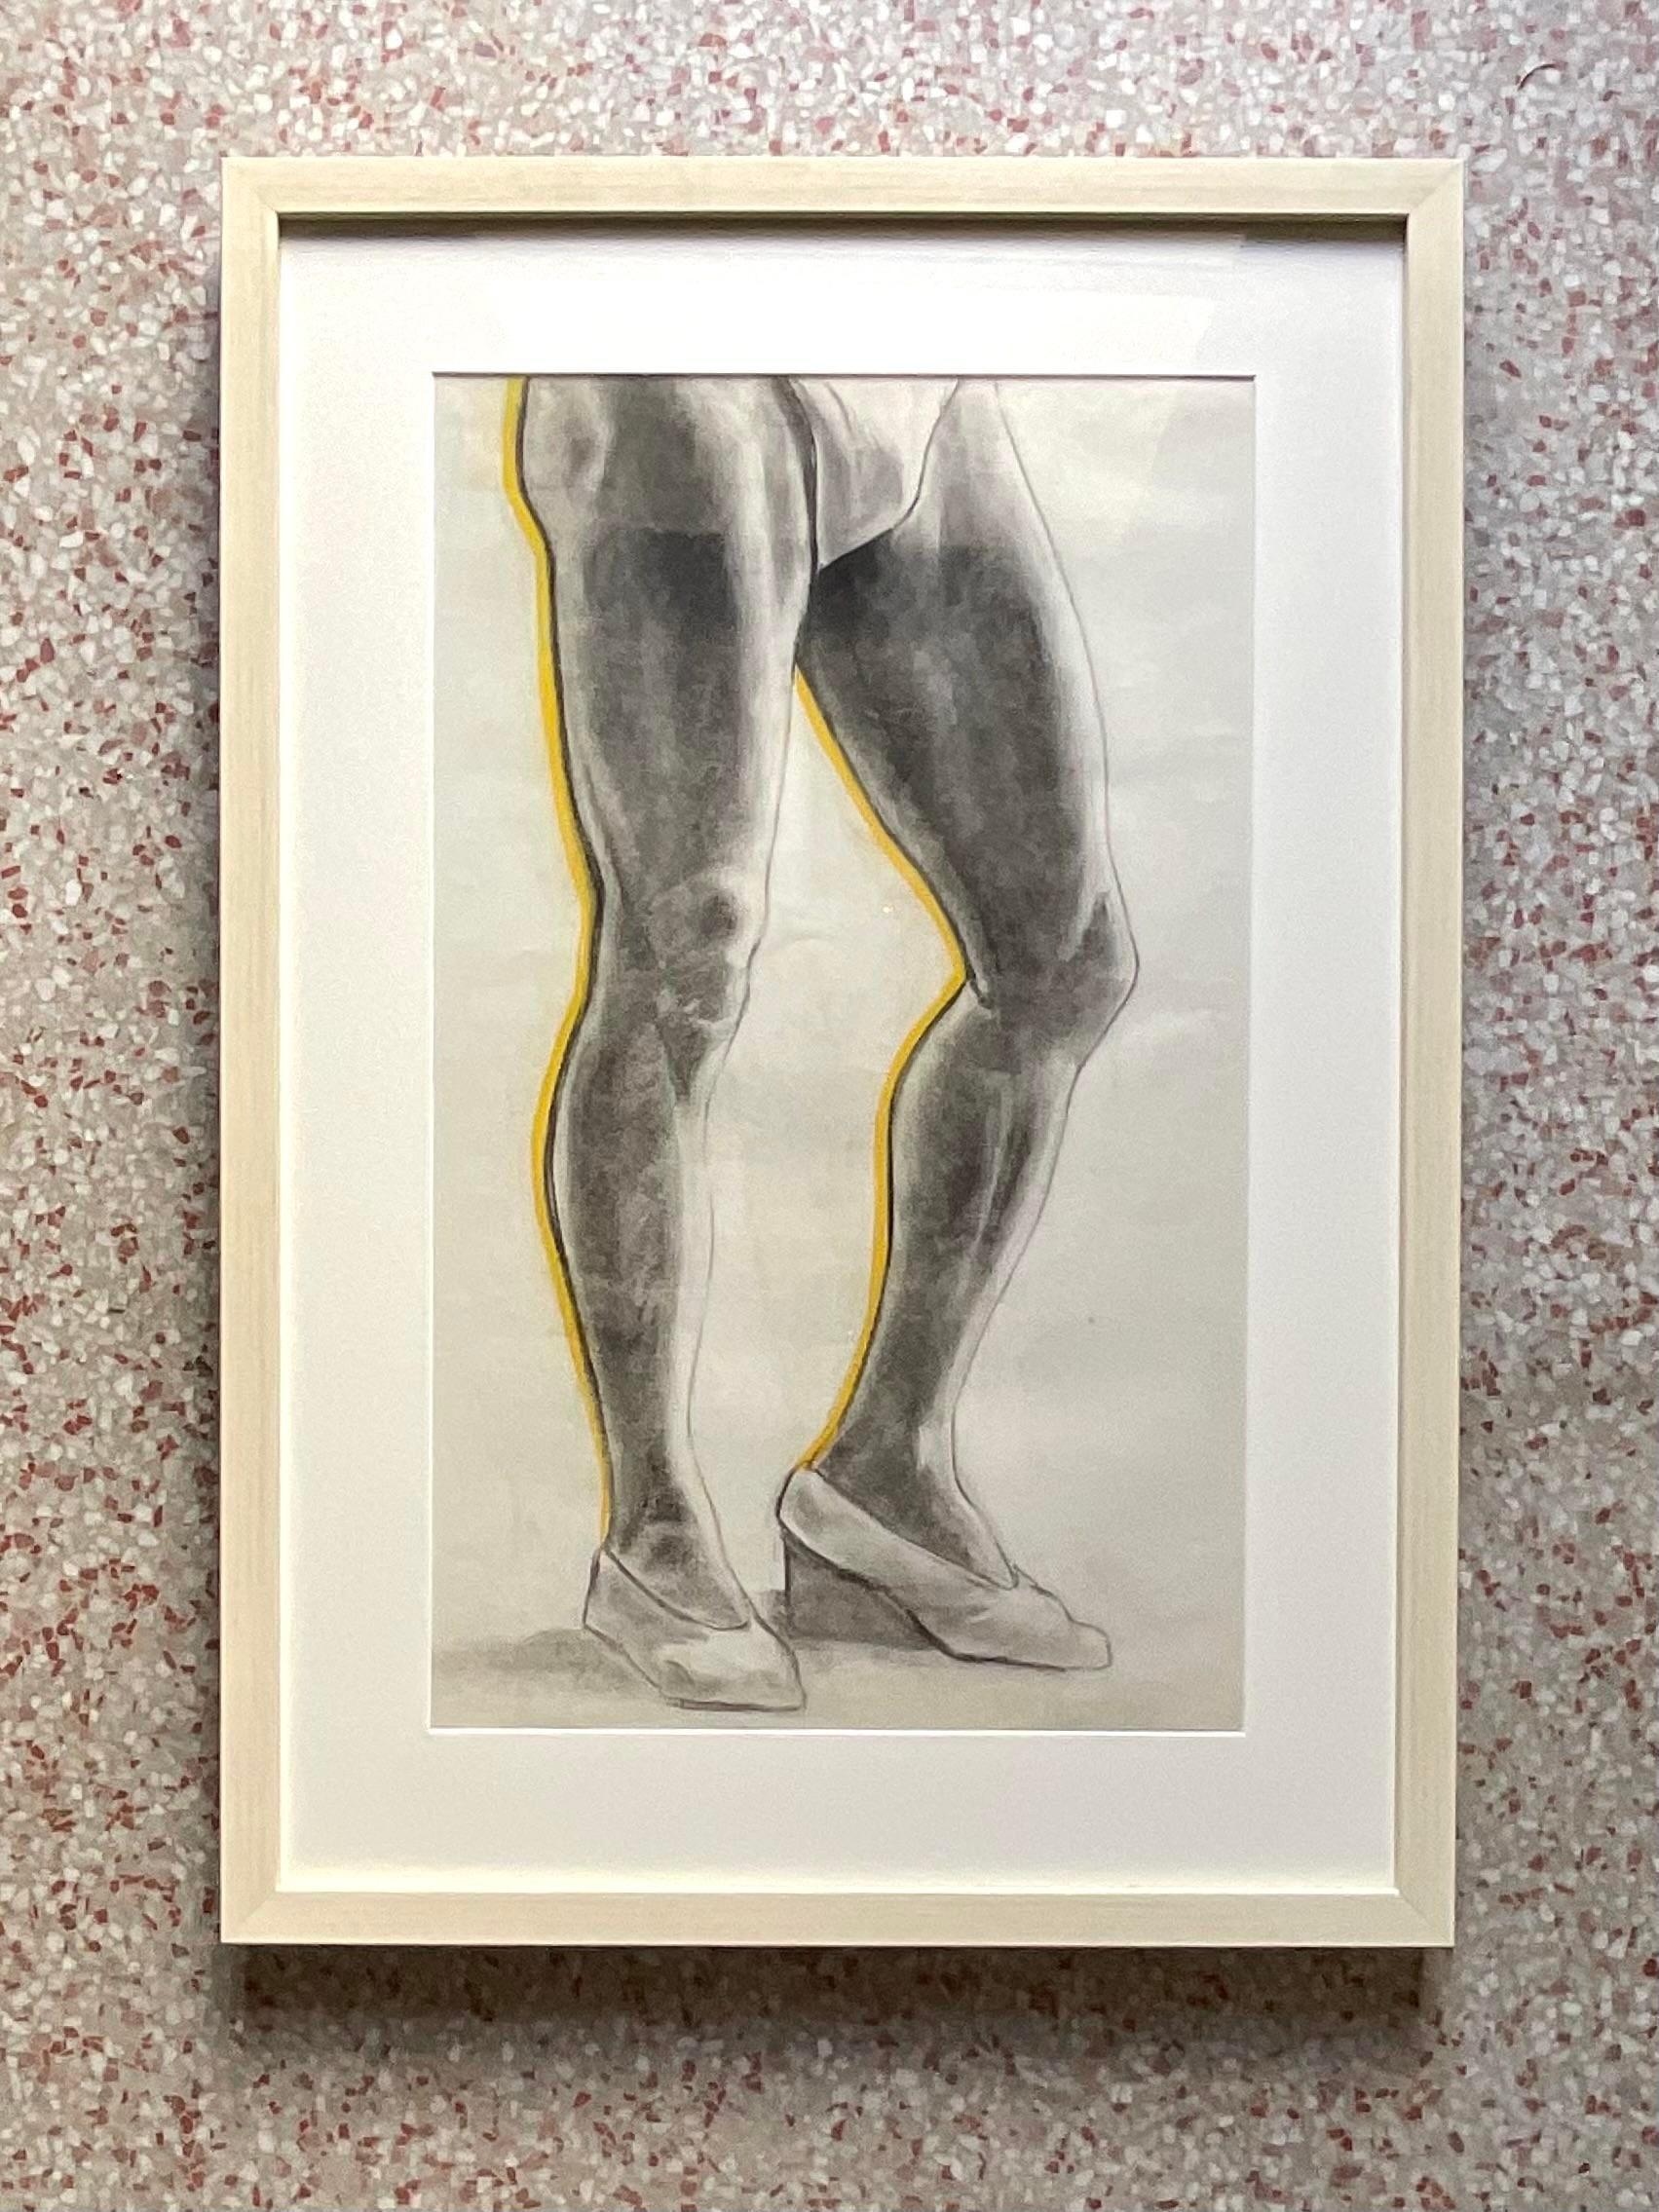 Vintage Boho Original Pencil Sketch of a Man's legs. A chic 1934 study in pencil with a flash of yellow. Acquired from a Palm Beach estate.